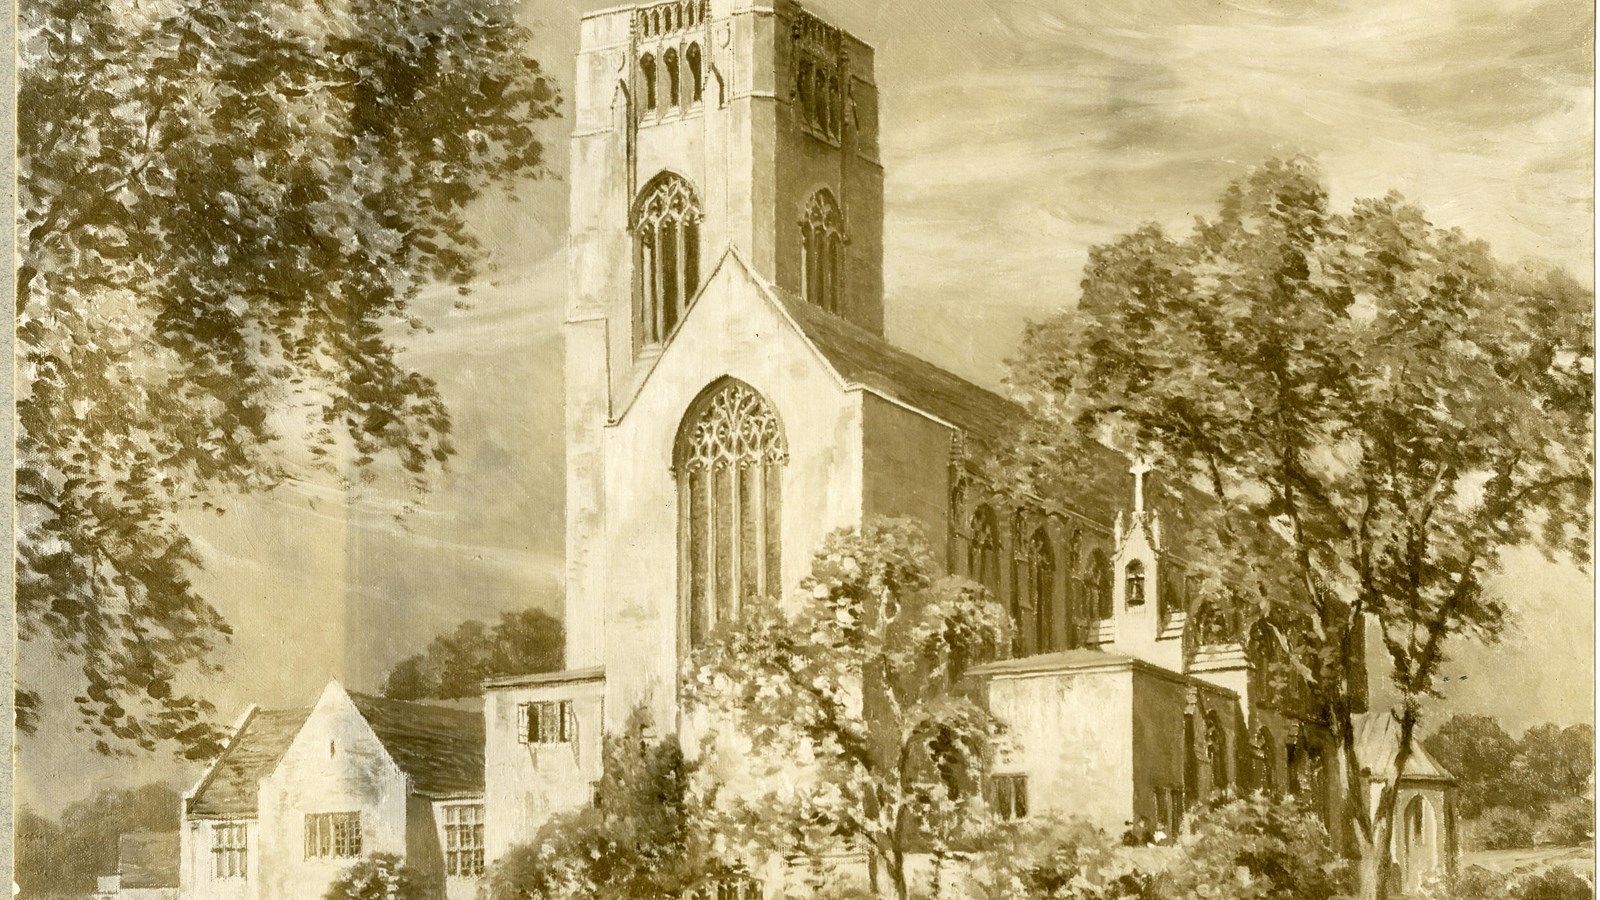 Pencil drawing of large church with trees and lawn all around building